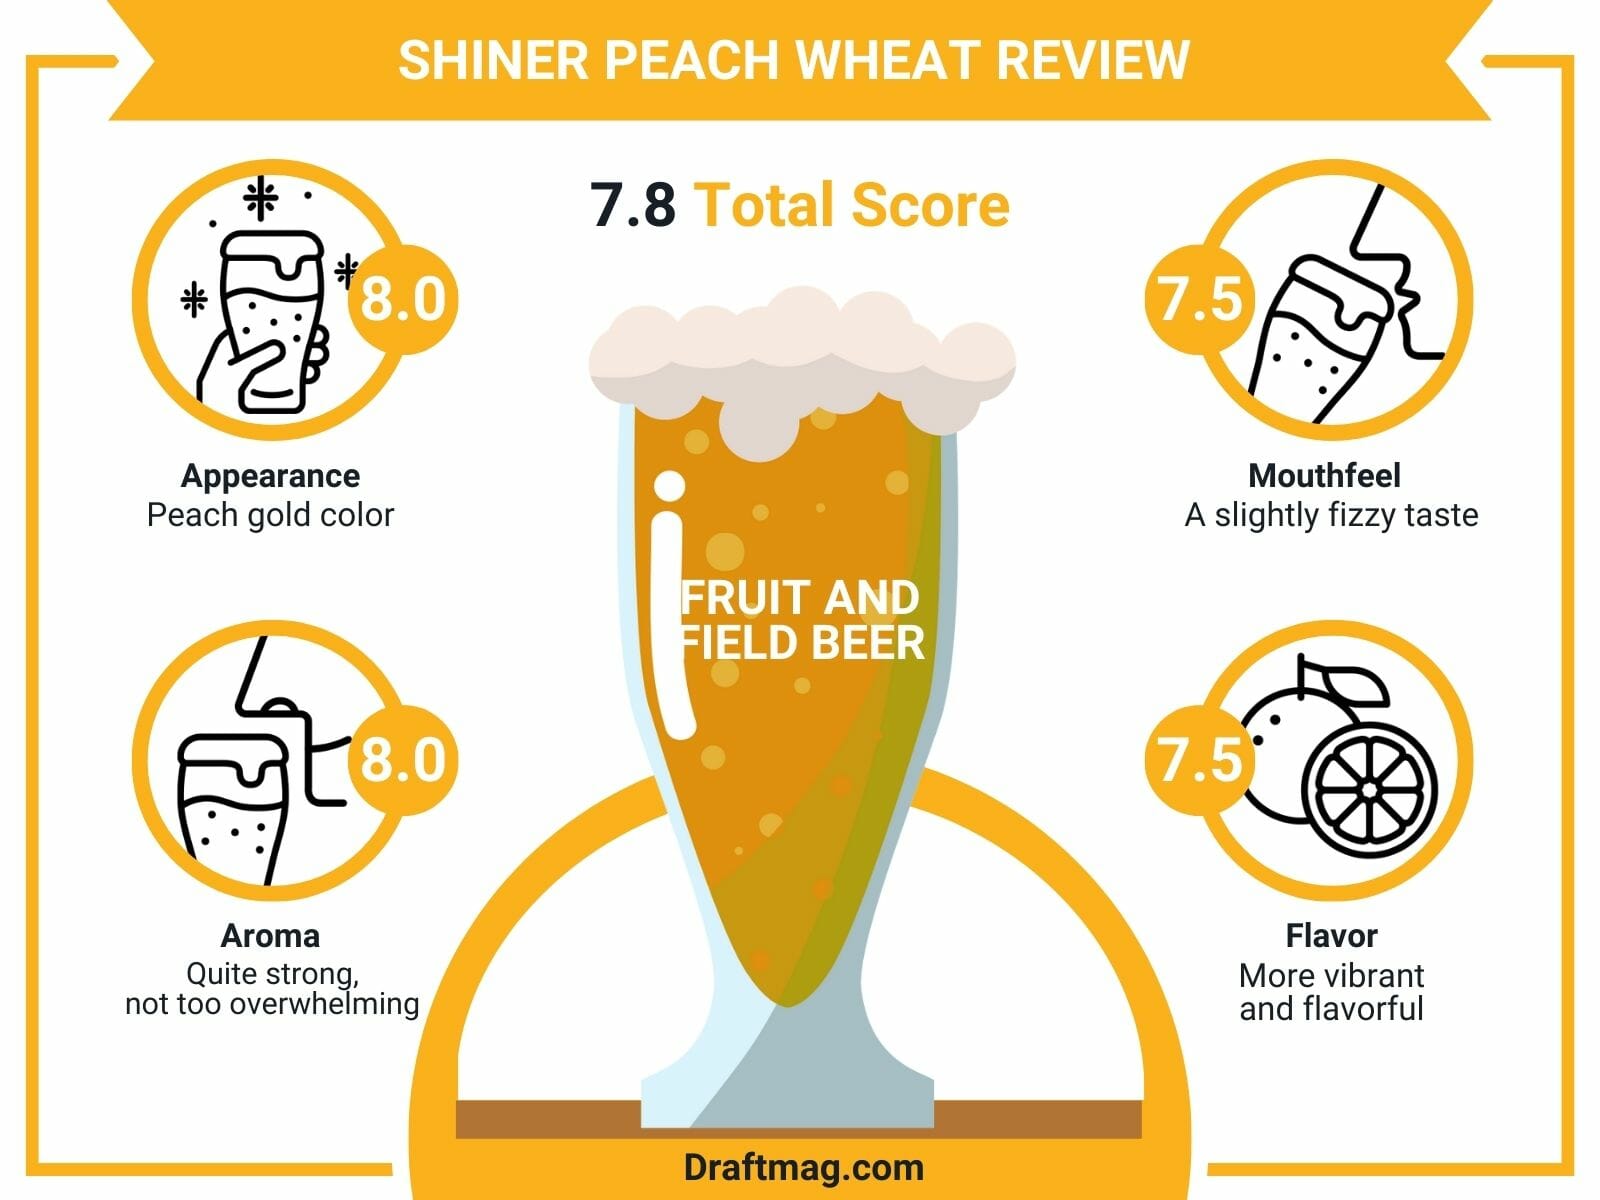 Shiner Peach Wheat Review Infographic